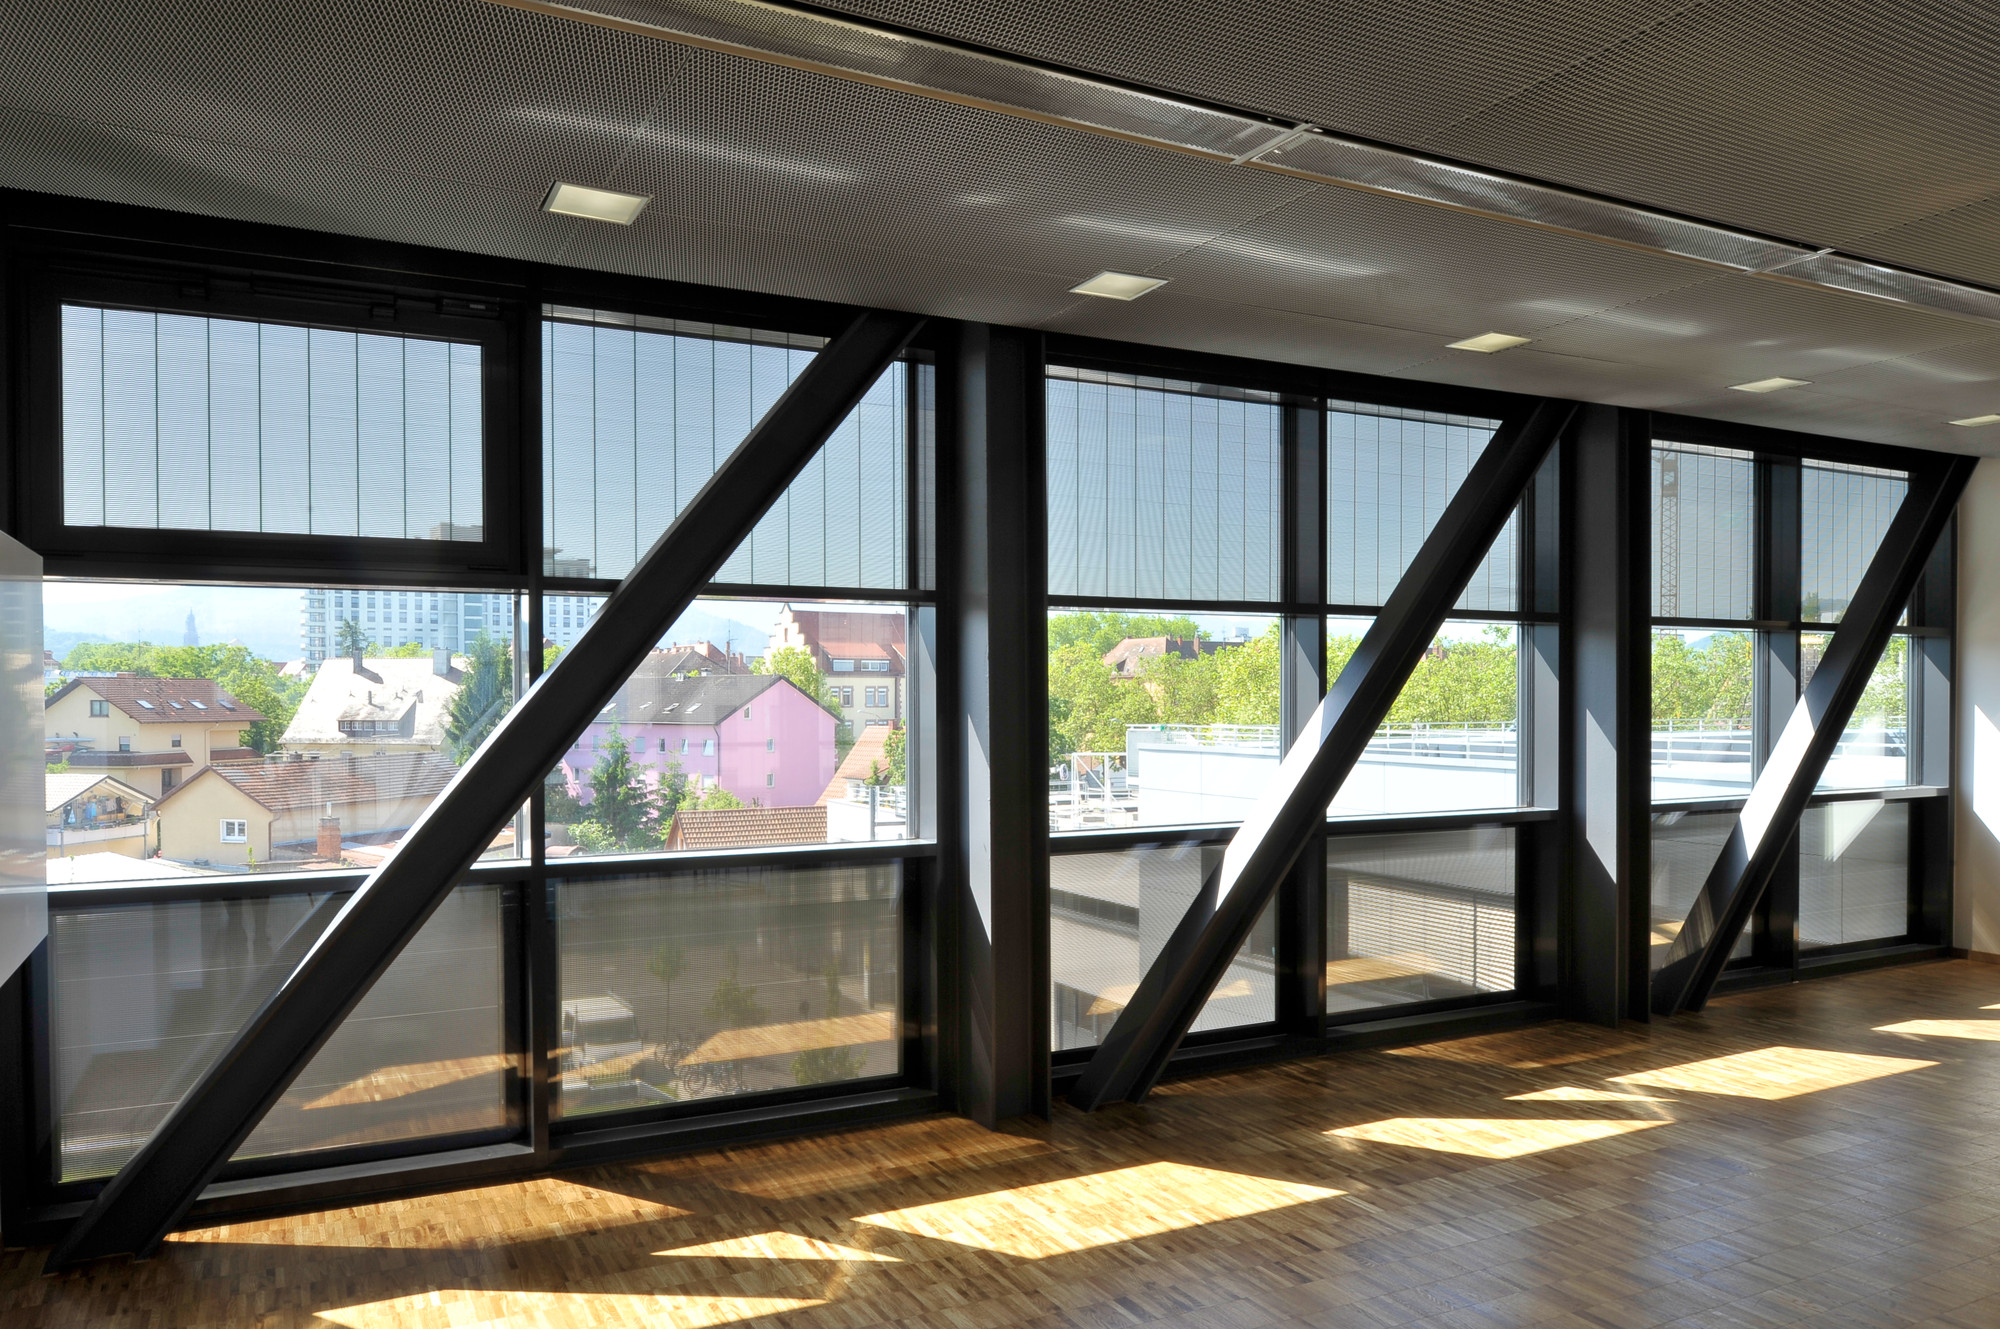 Seminar room with building-integrated photovoltaics (BIPV)